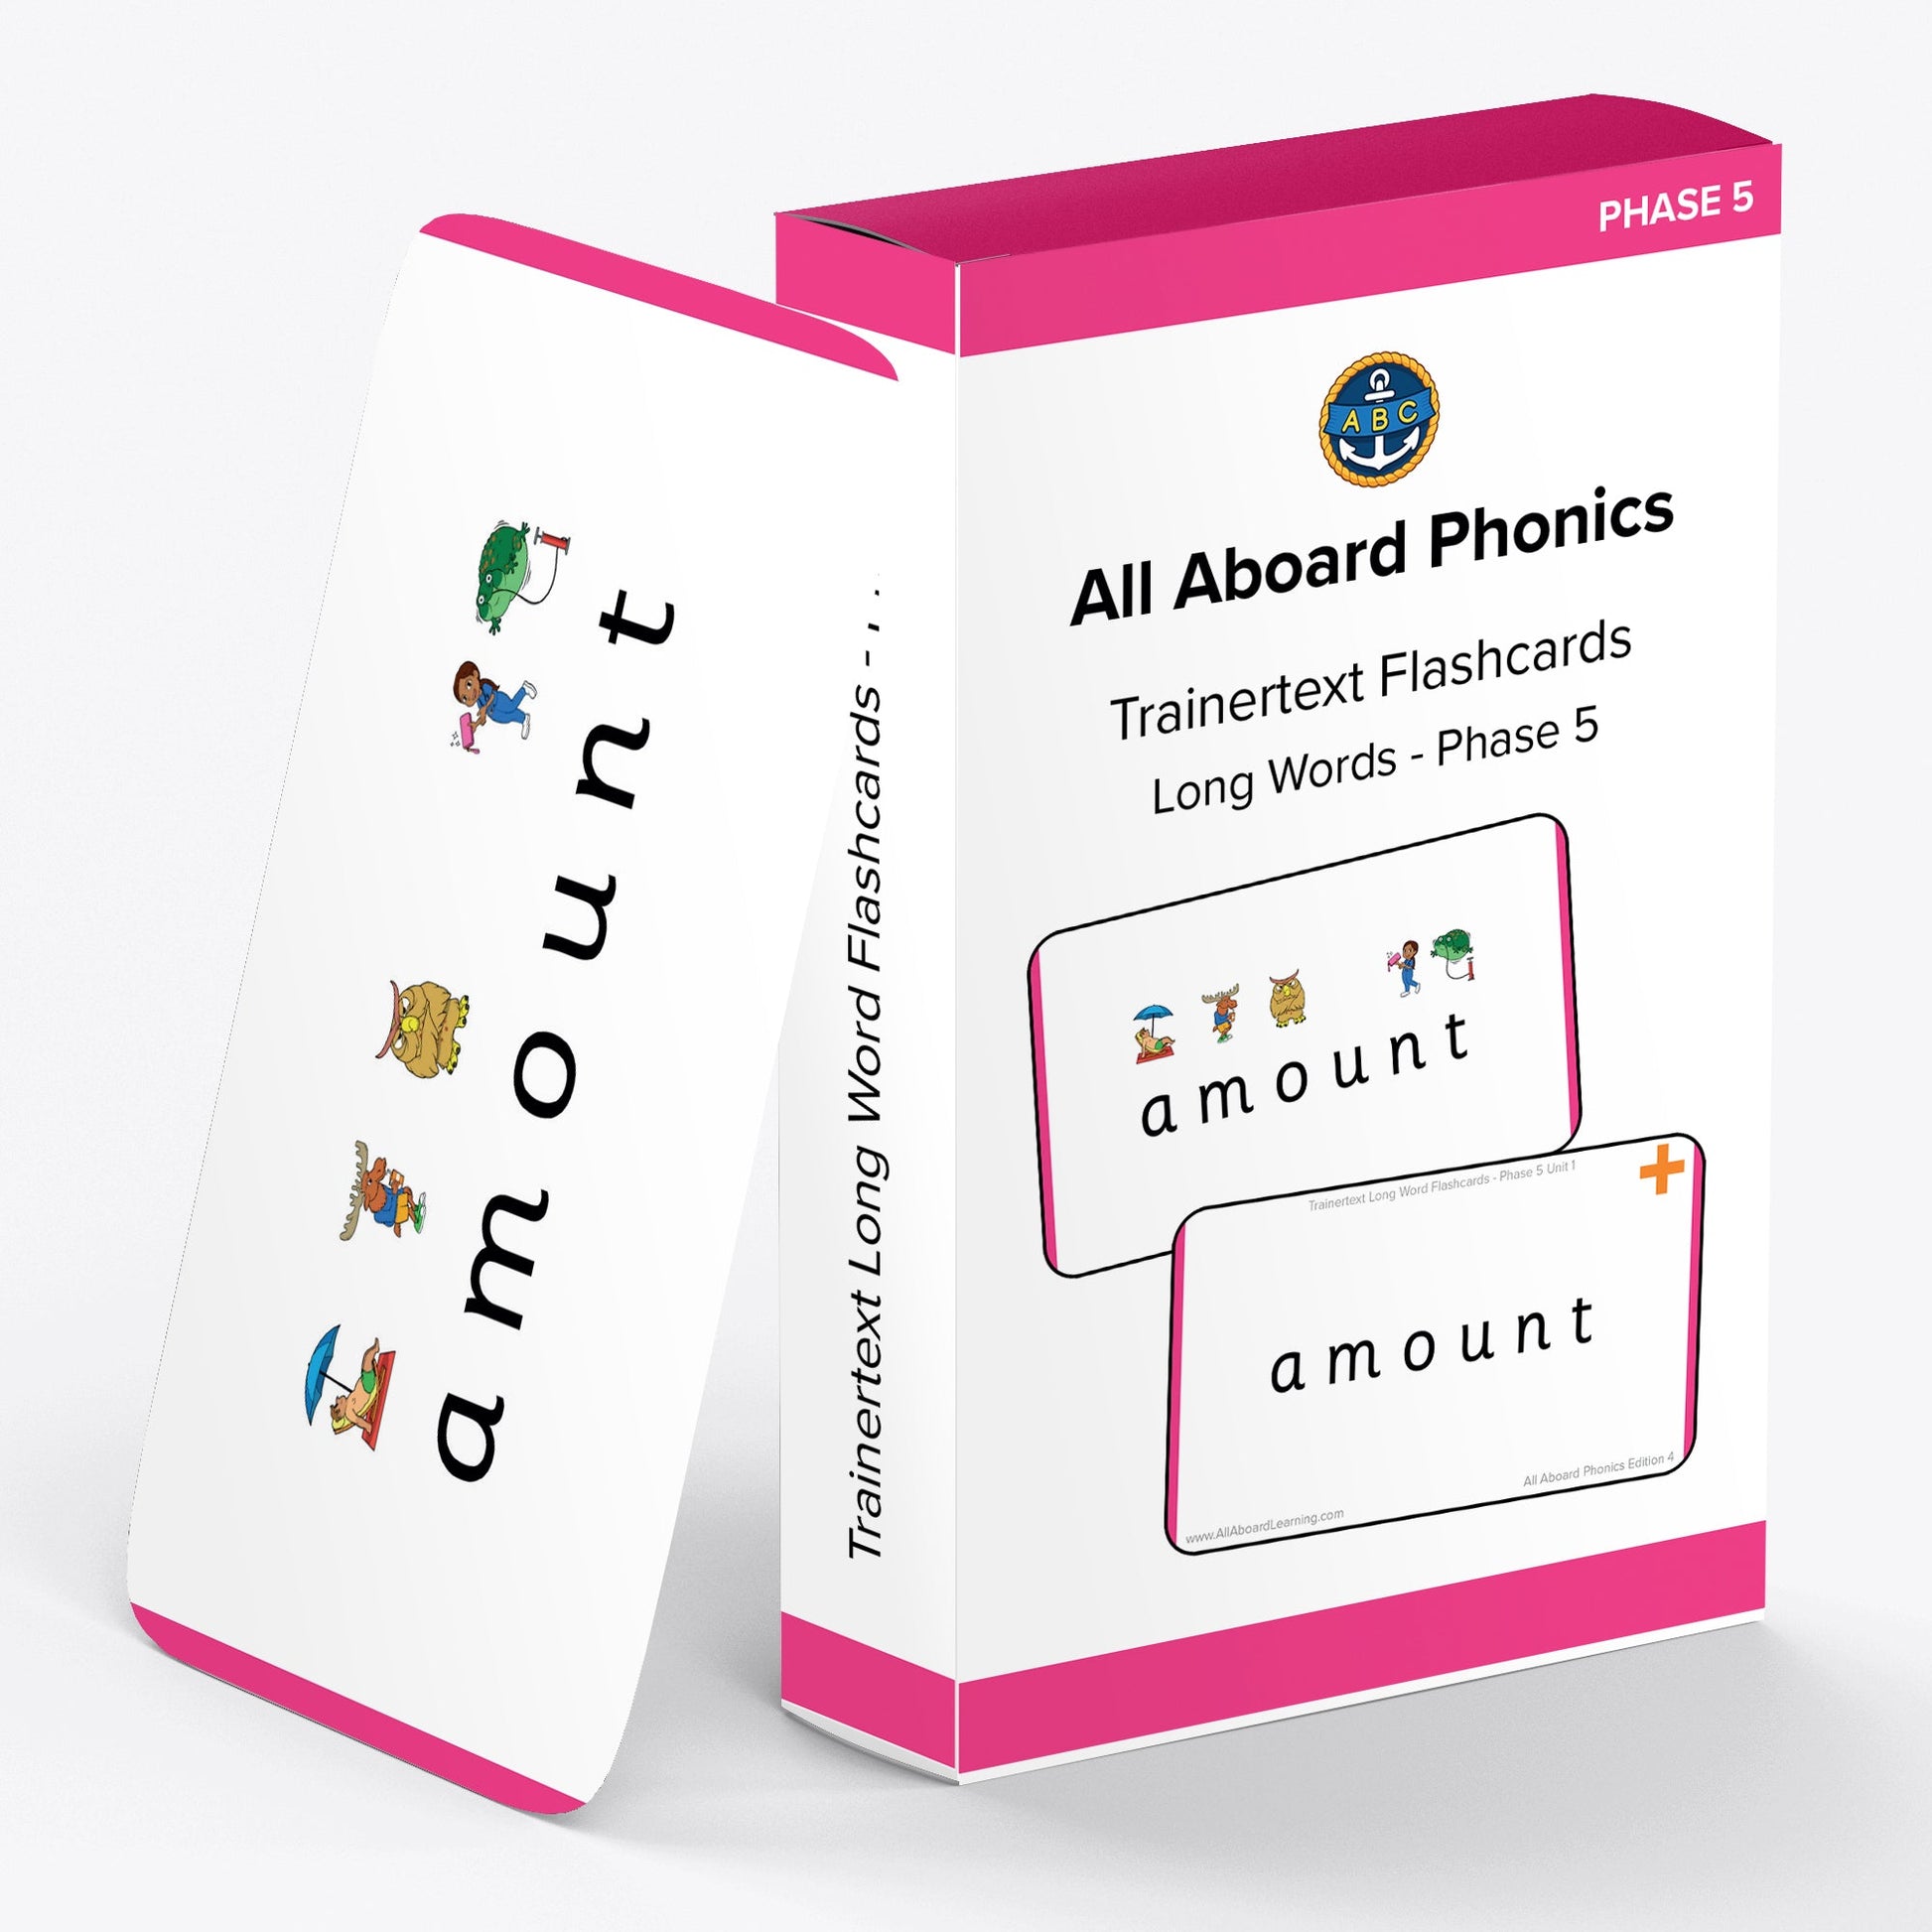 Trainertext Long Word Flashcards - Phase 5 - All Aboard Learning Ltd